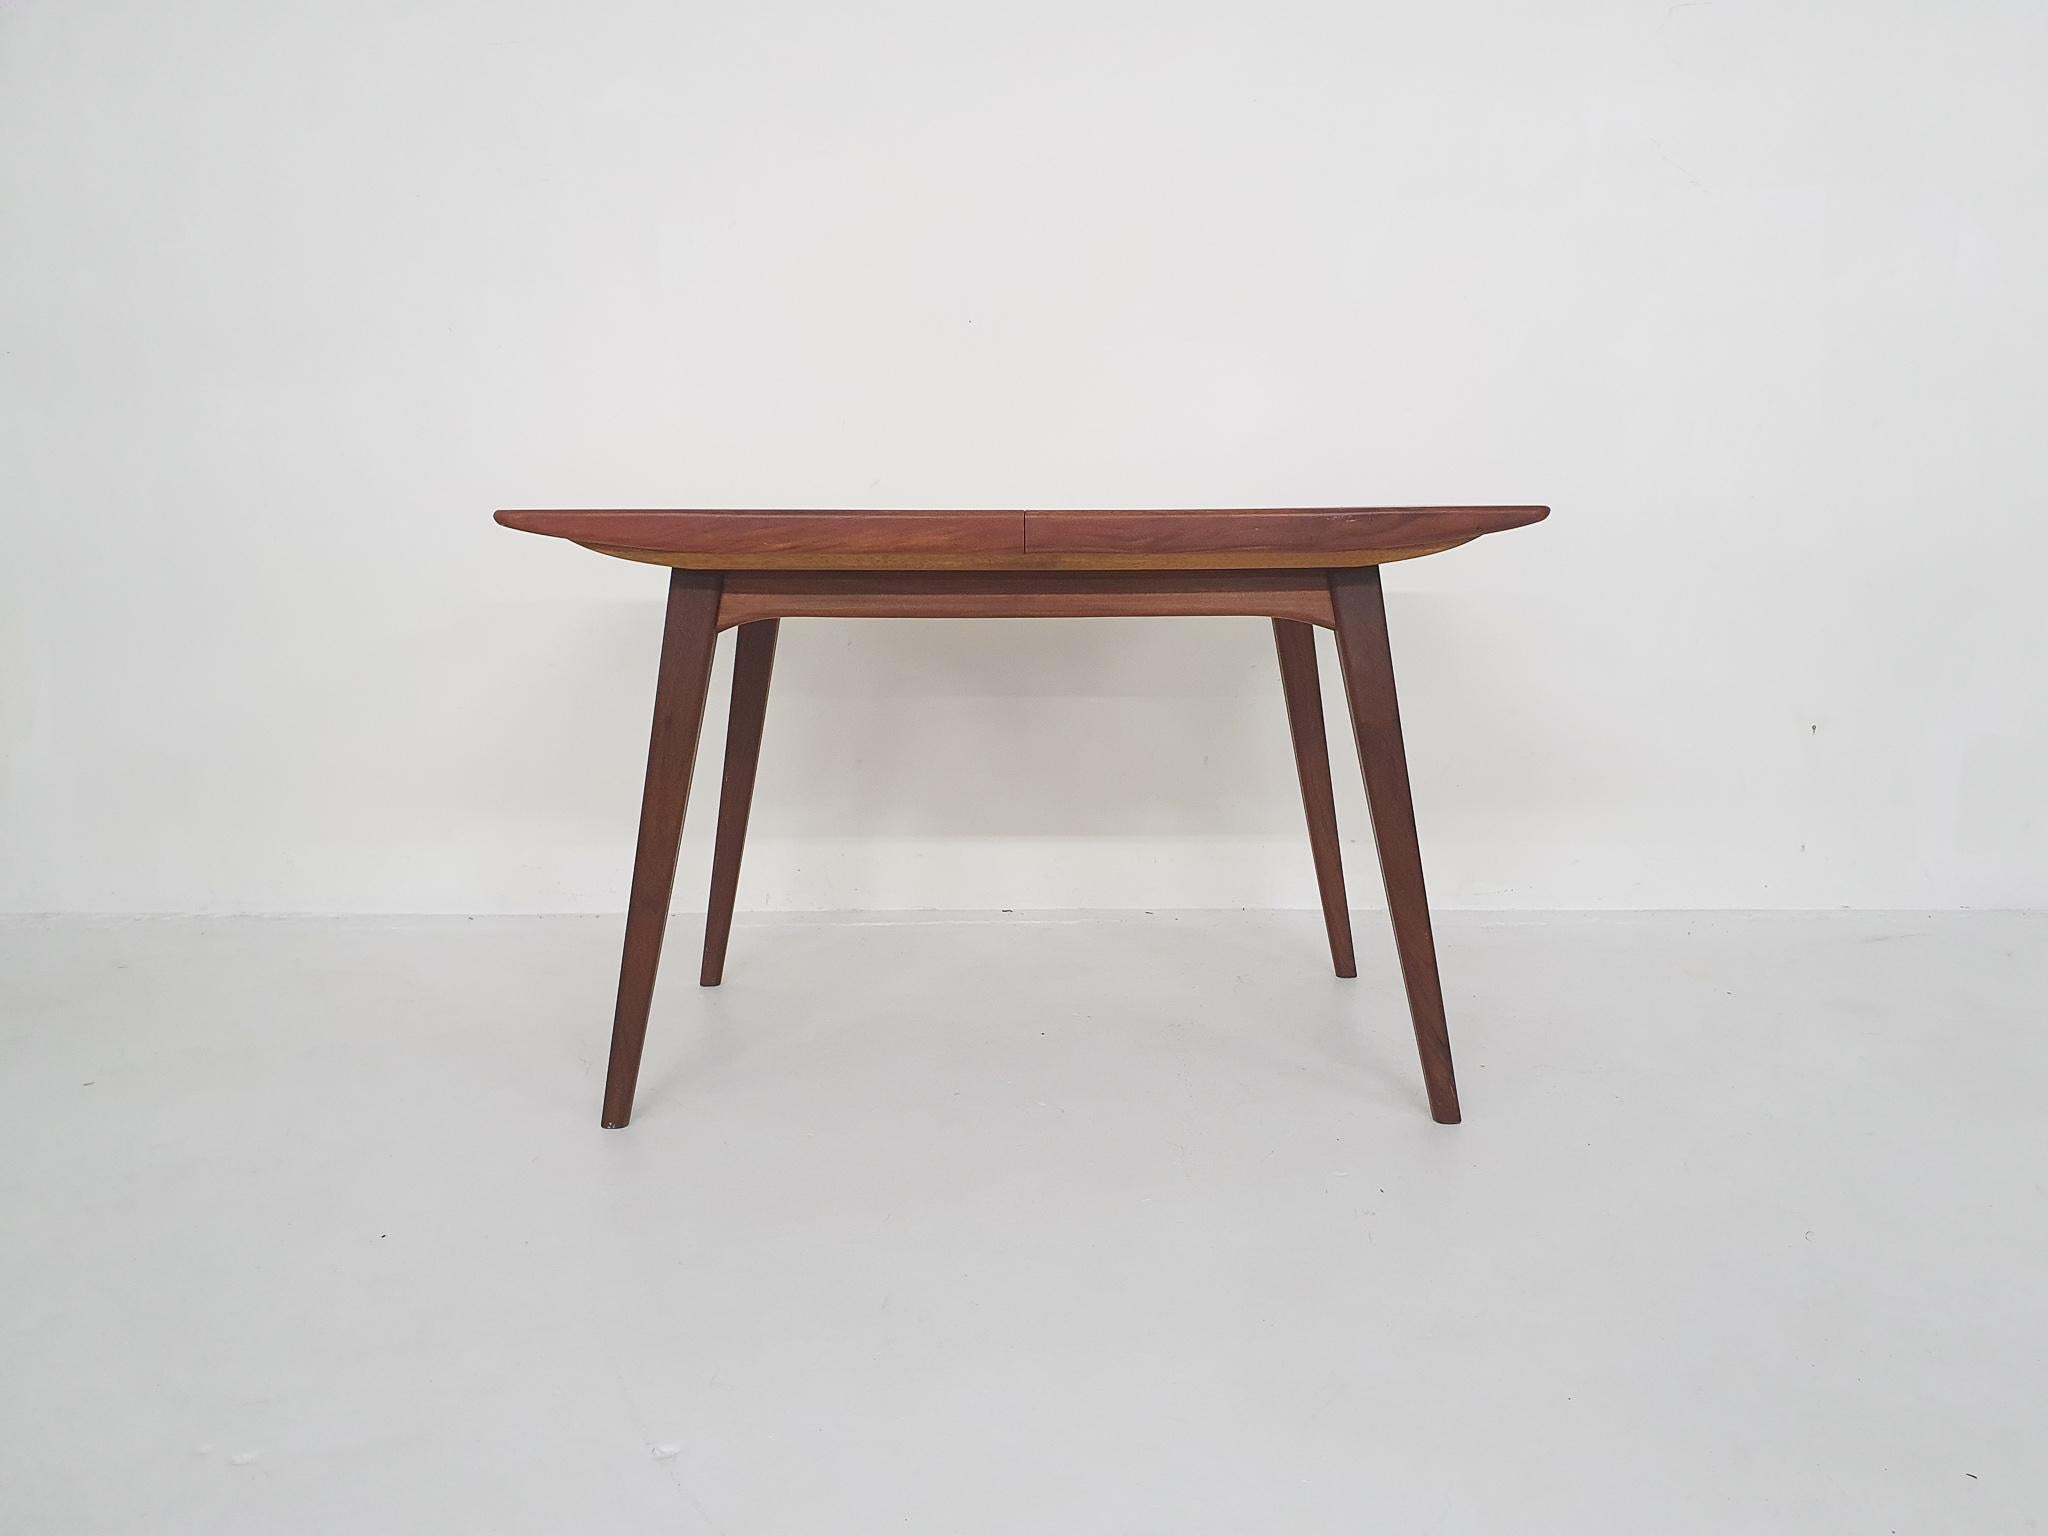 Teak dining table by Louis van Teeffelen for Webe.
Table can be extended from 120 till 155 cm
Louis van Teeffelen was the most important designer at Wébé. His work was often influenced by Danish mid century modern. Like Danish designs of the same